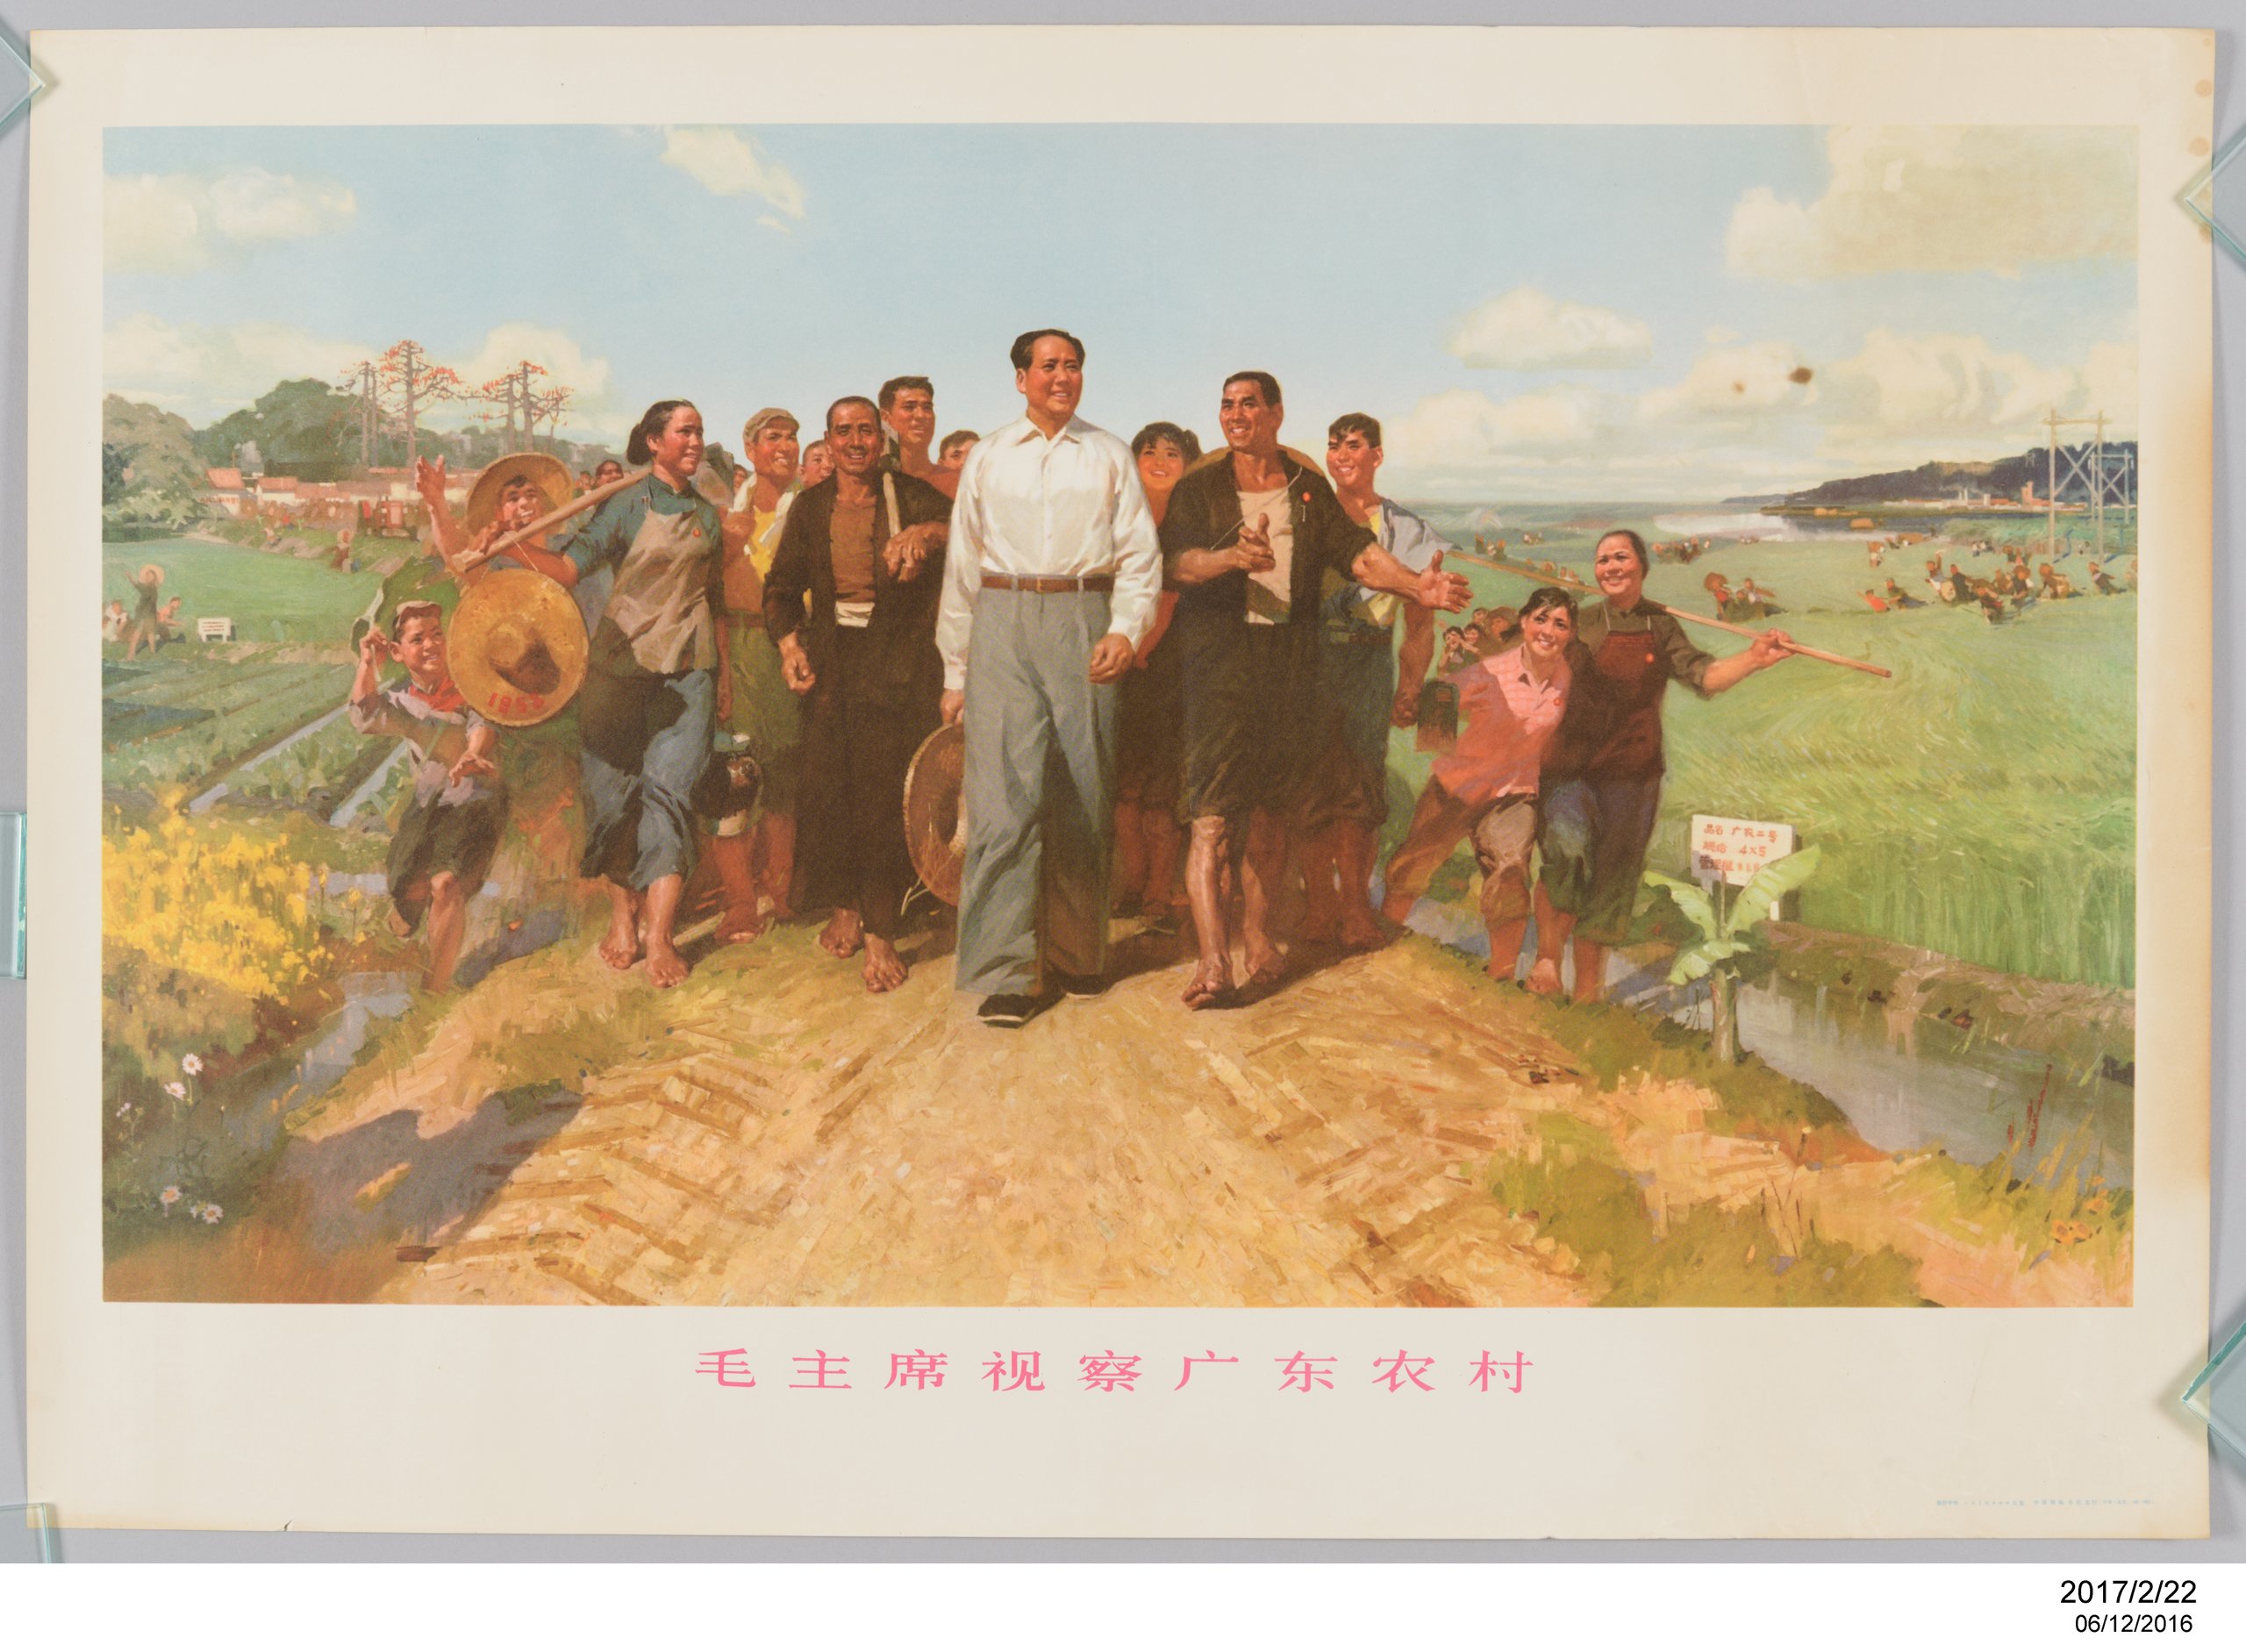 'Chairman Mao visits to see a farm village of Guangdong' poster